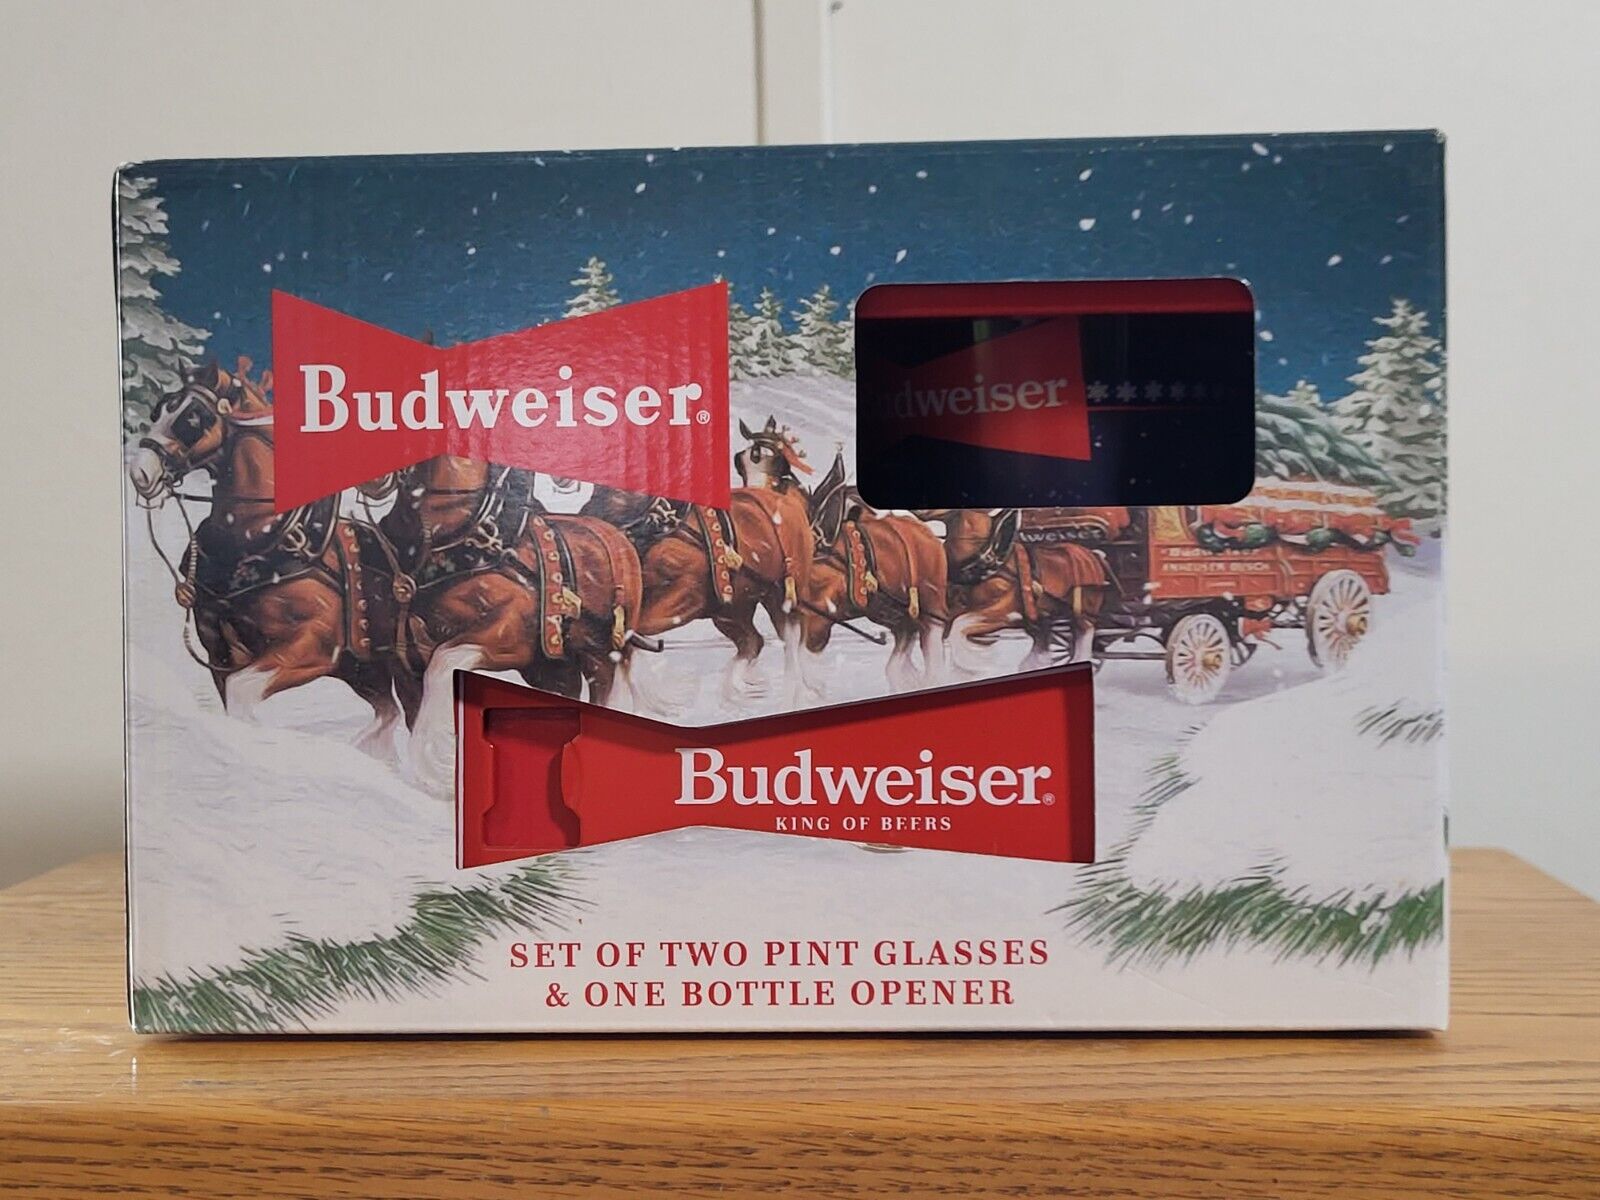 Budweiser Set 2 Pint Glasses Christmas and Bottle Opener, Limited Edition